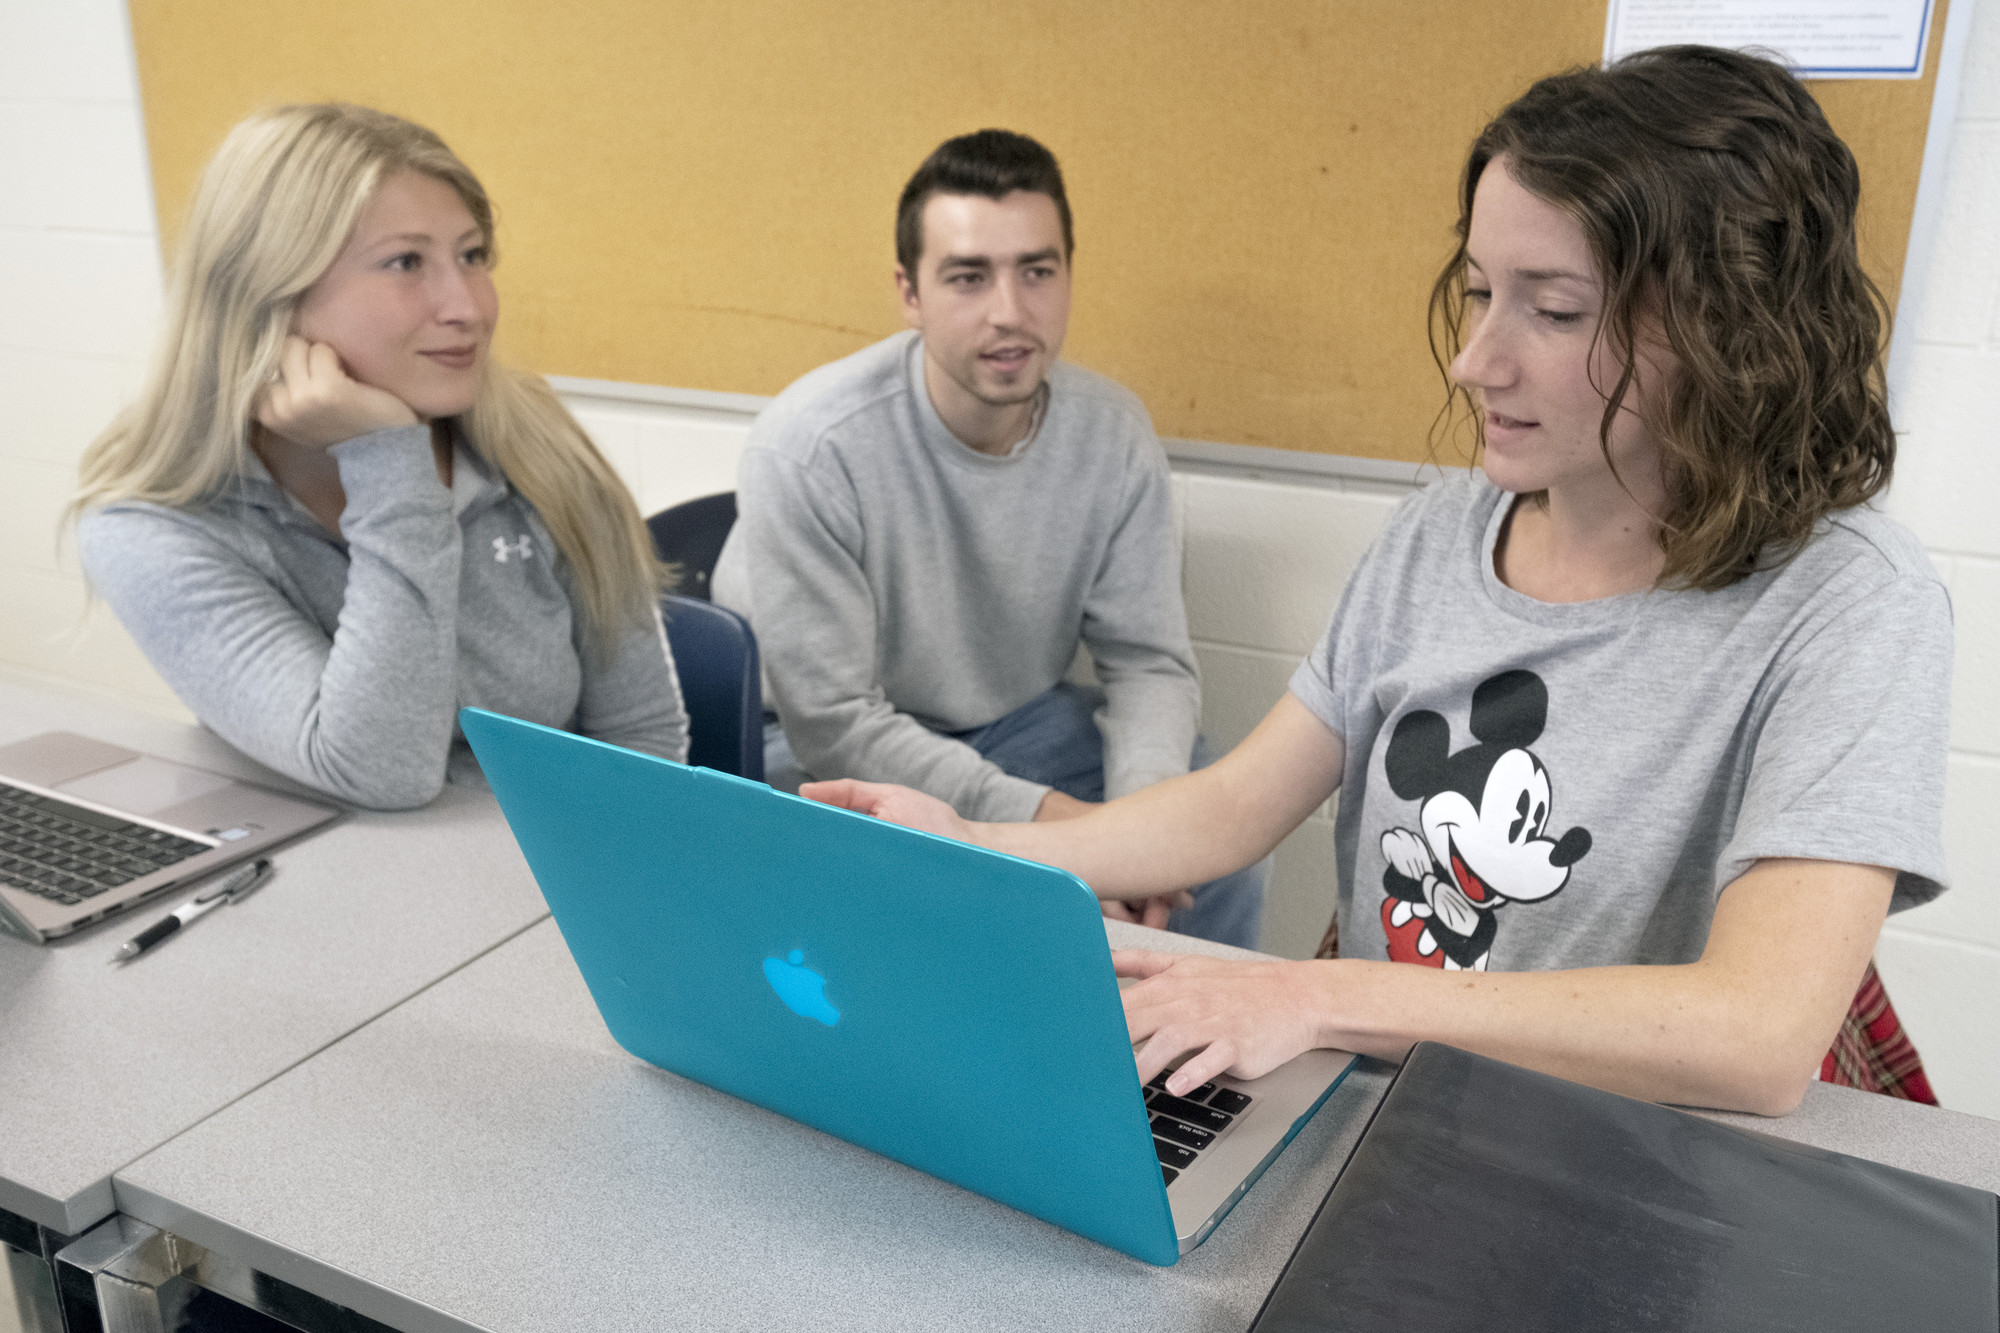 2 female and 1 male student sitting in a classroom working on a laptop